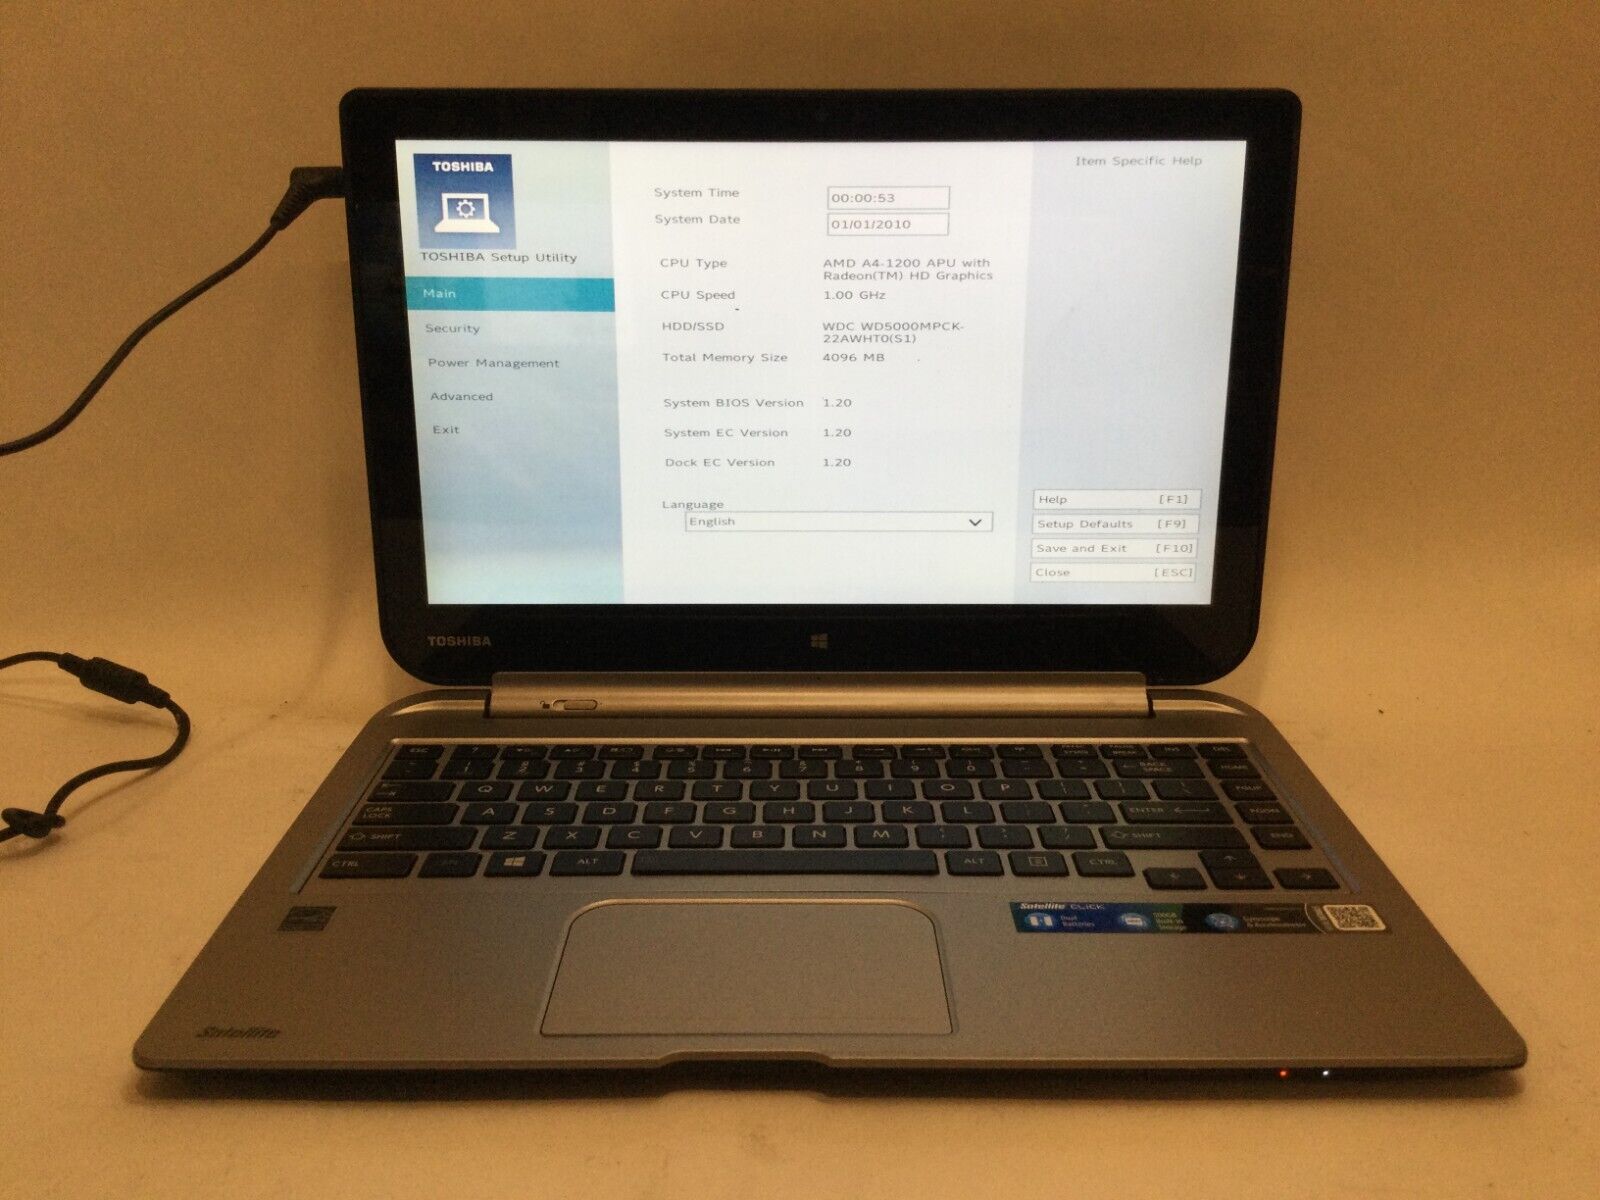 Toshiba Satellite Click W35dt-A3300 / AMD A4-1200 /(MISSING PARTS)MR